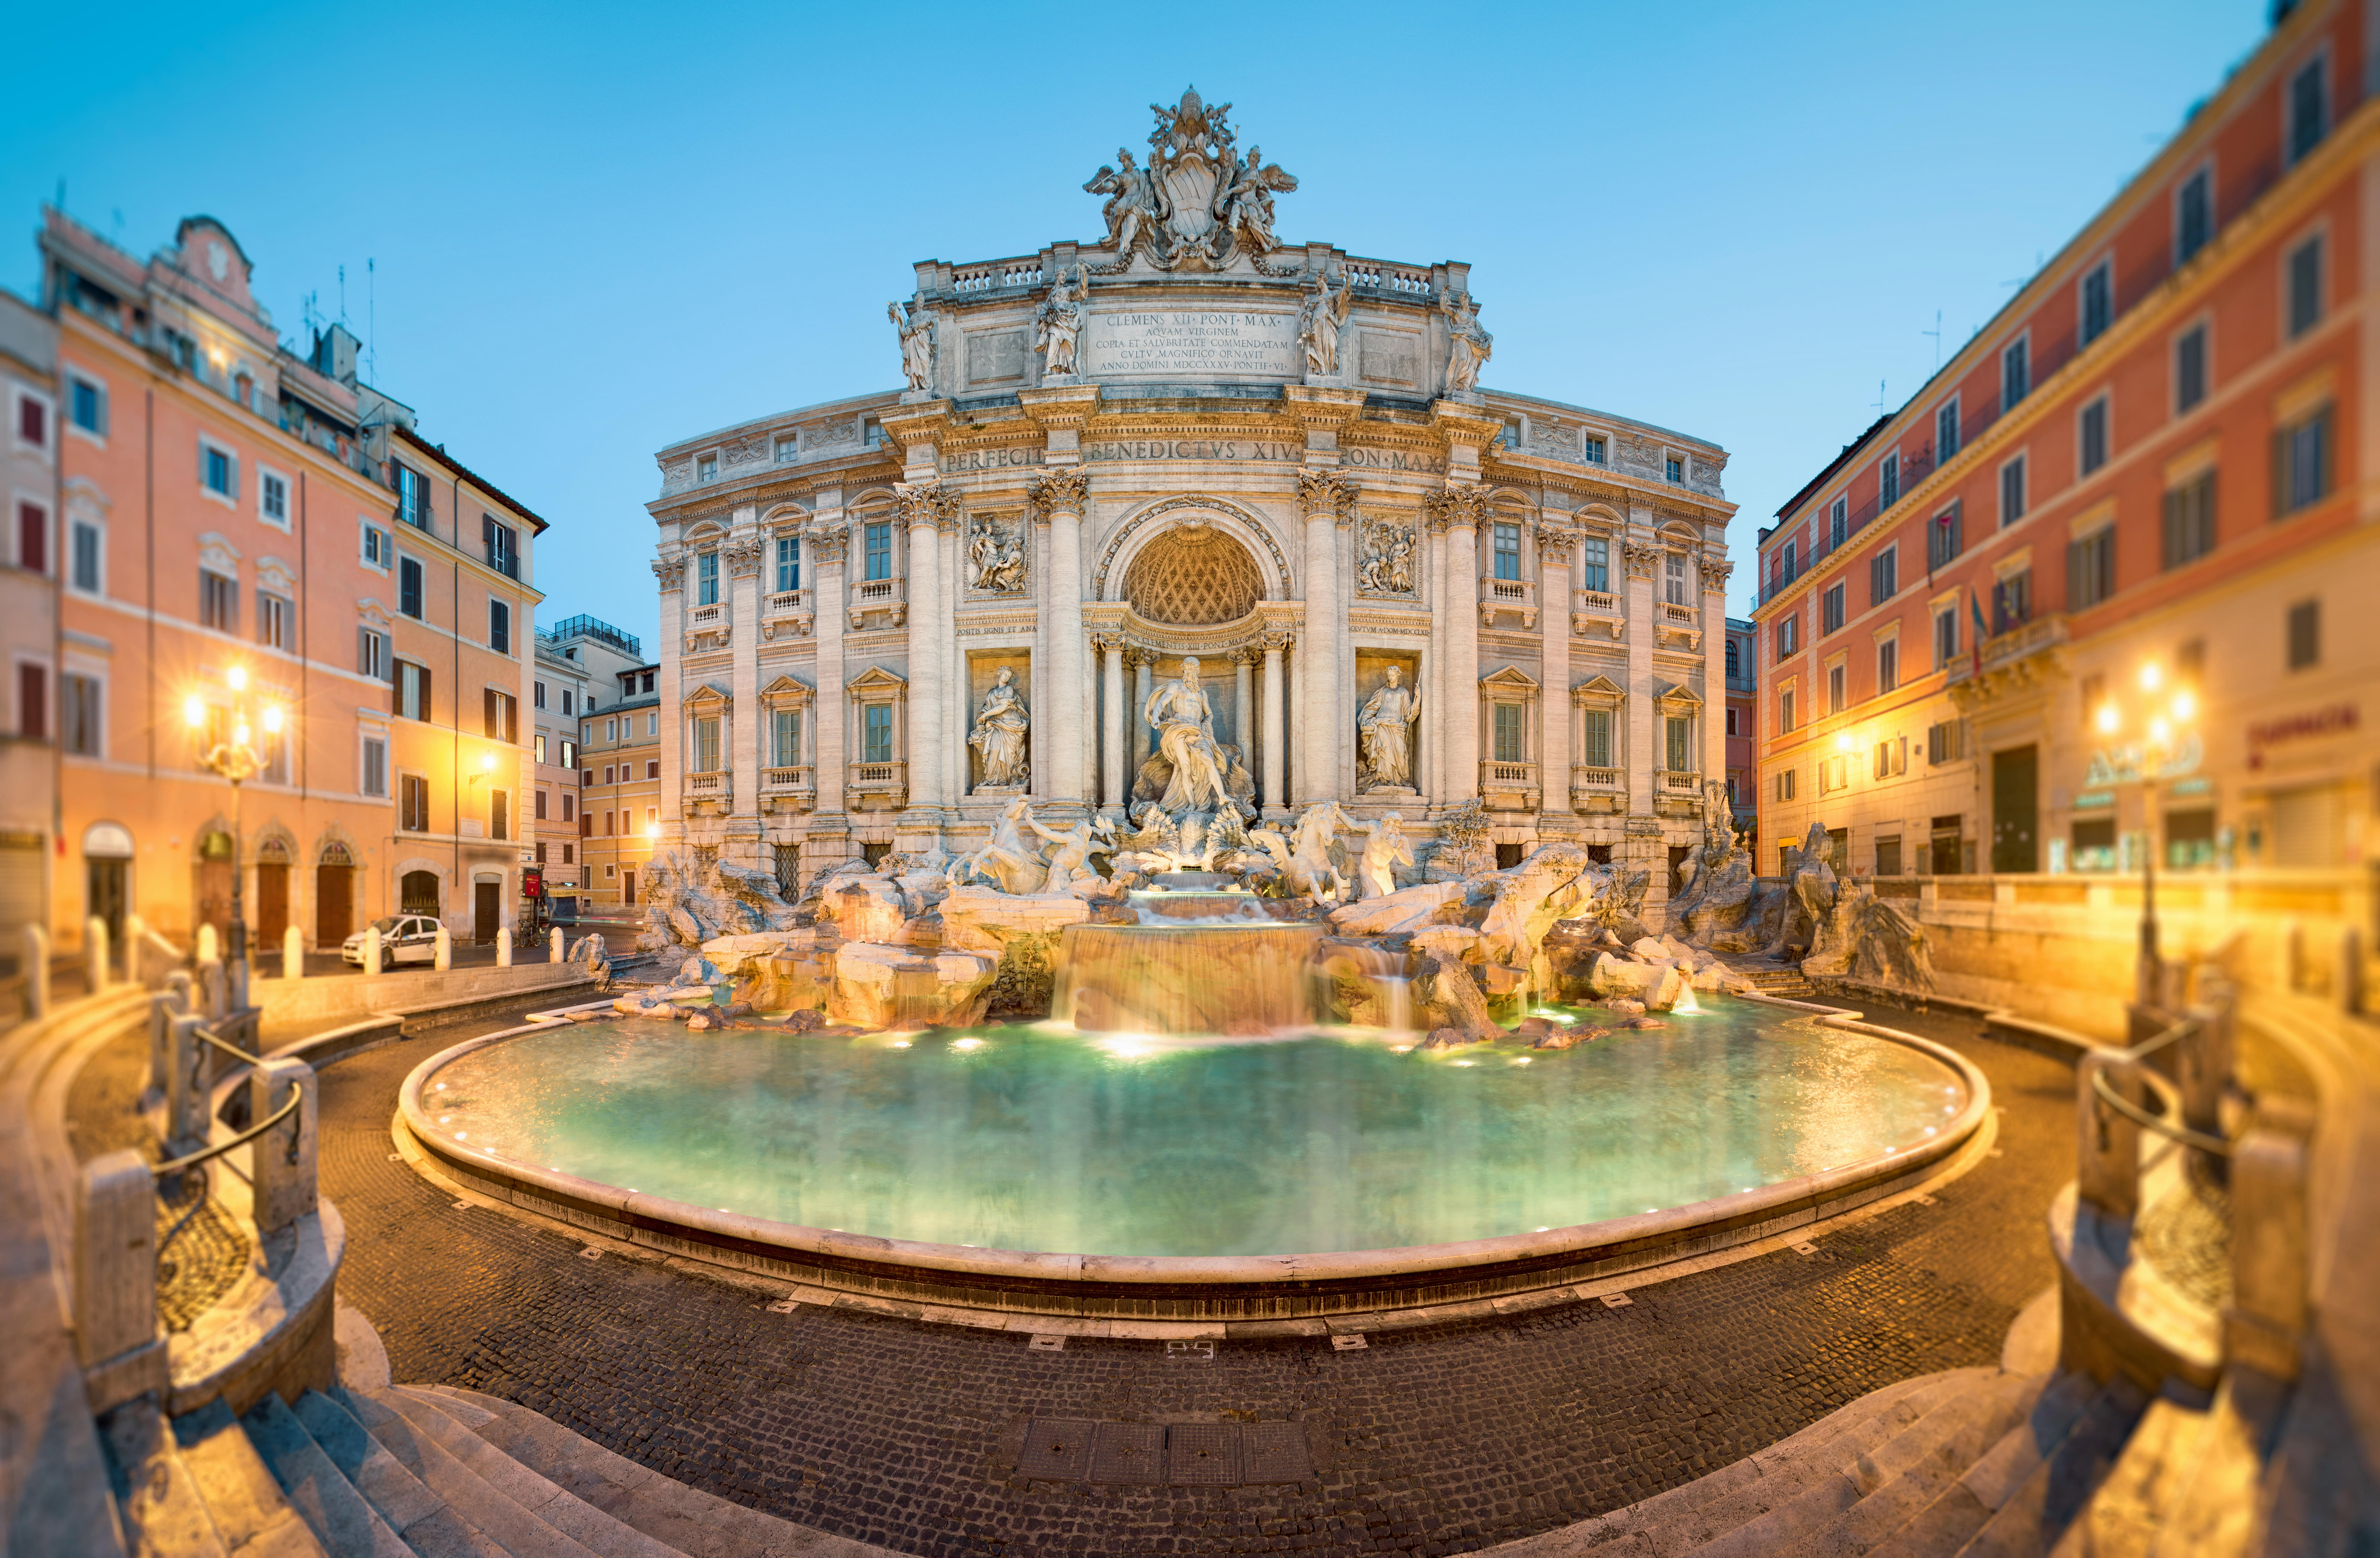 Go on a tour to the Trevi Fountain in Rome